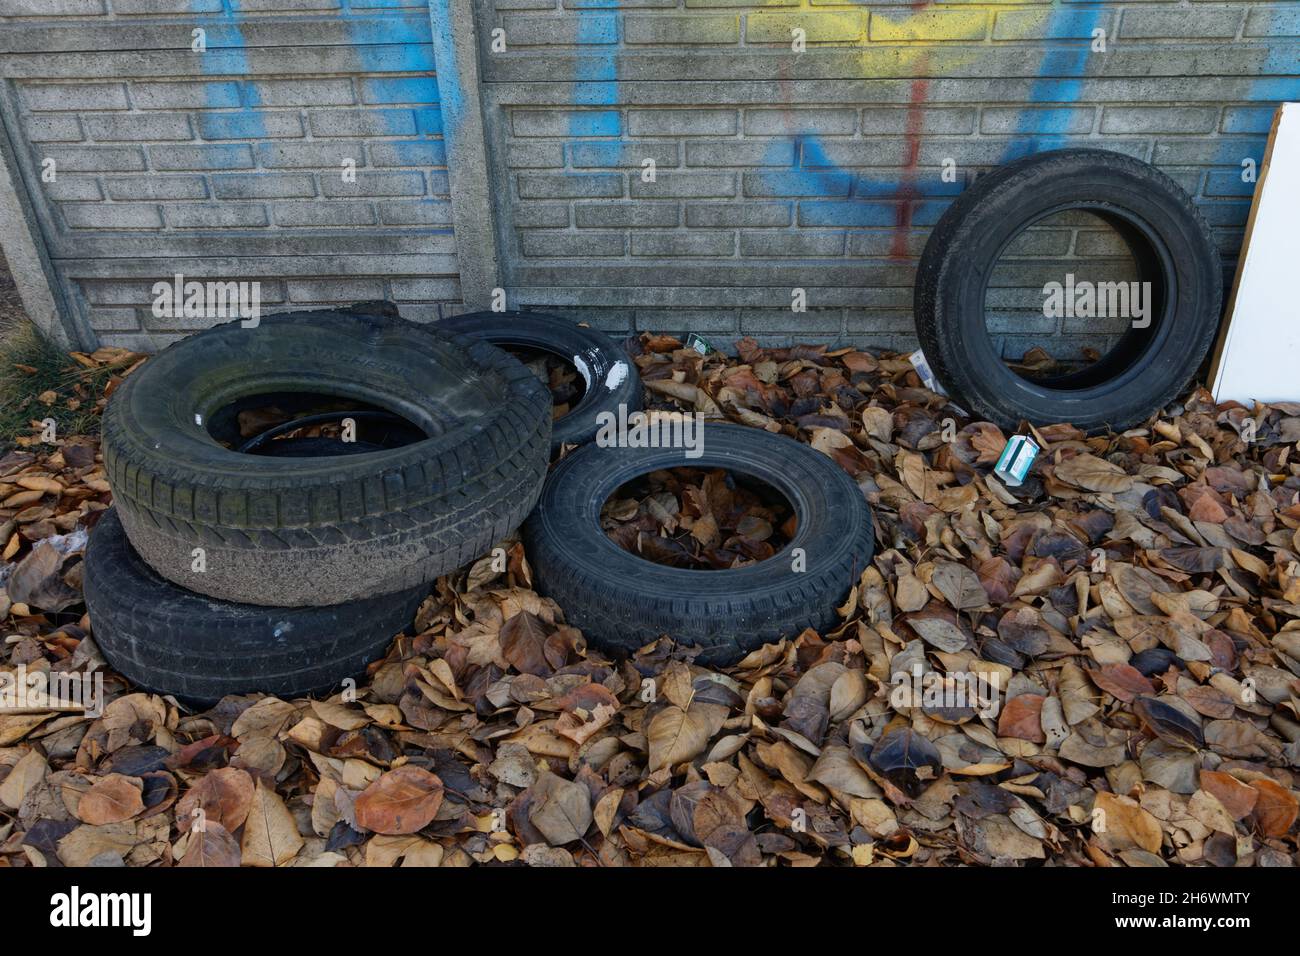 Waste tires recklessly left on the street. Stock Photo